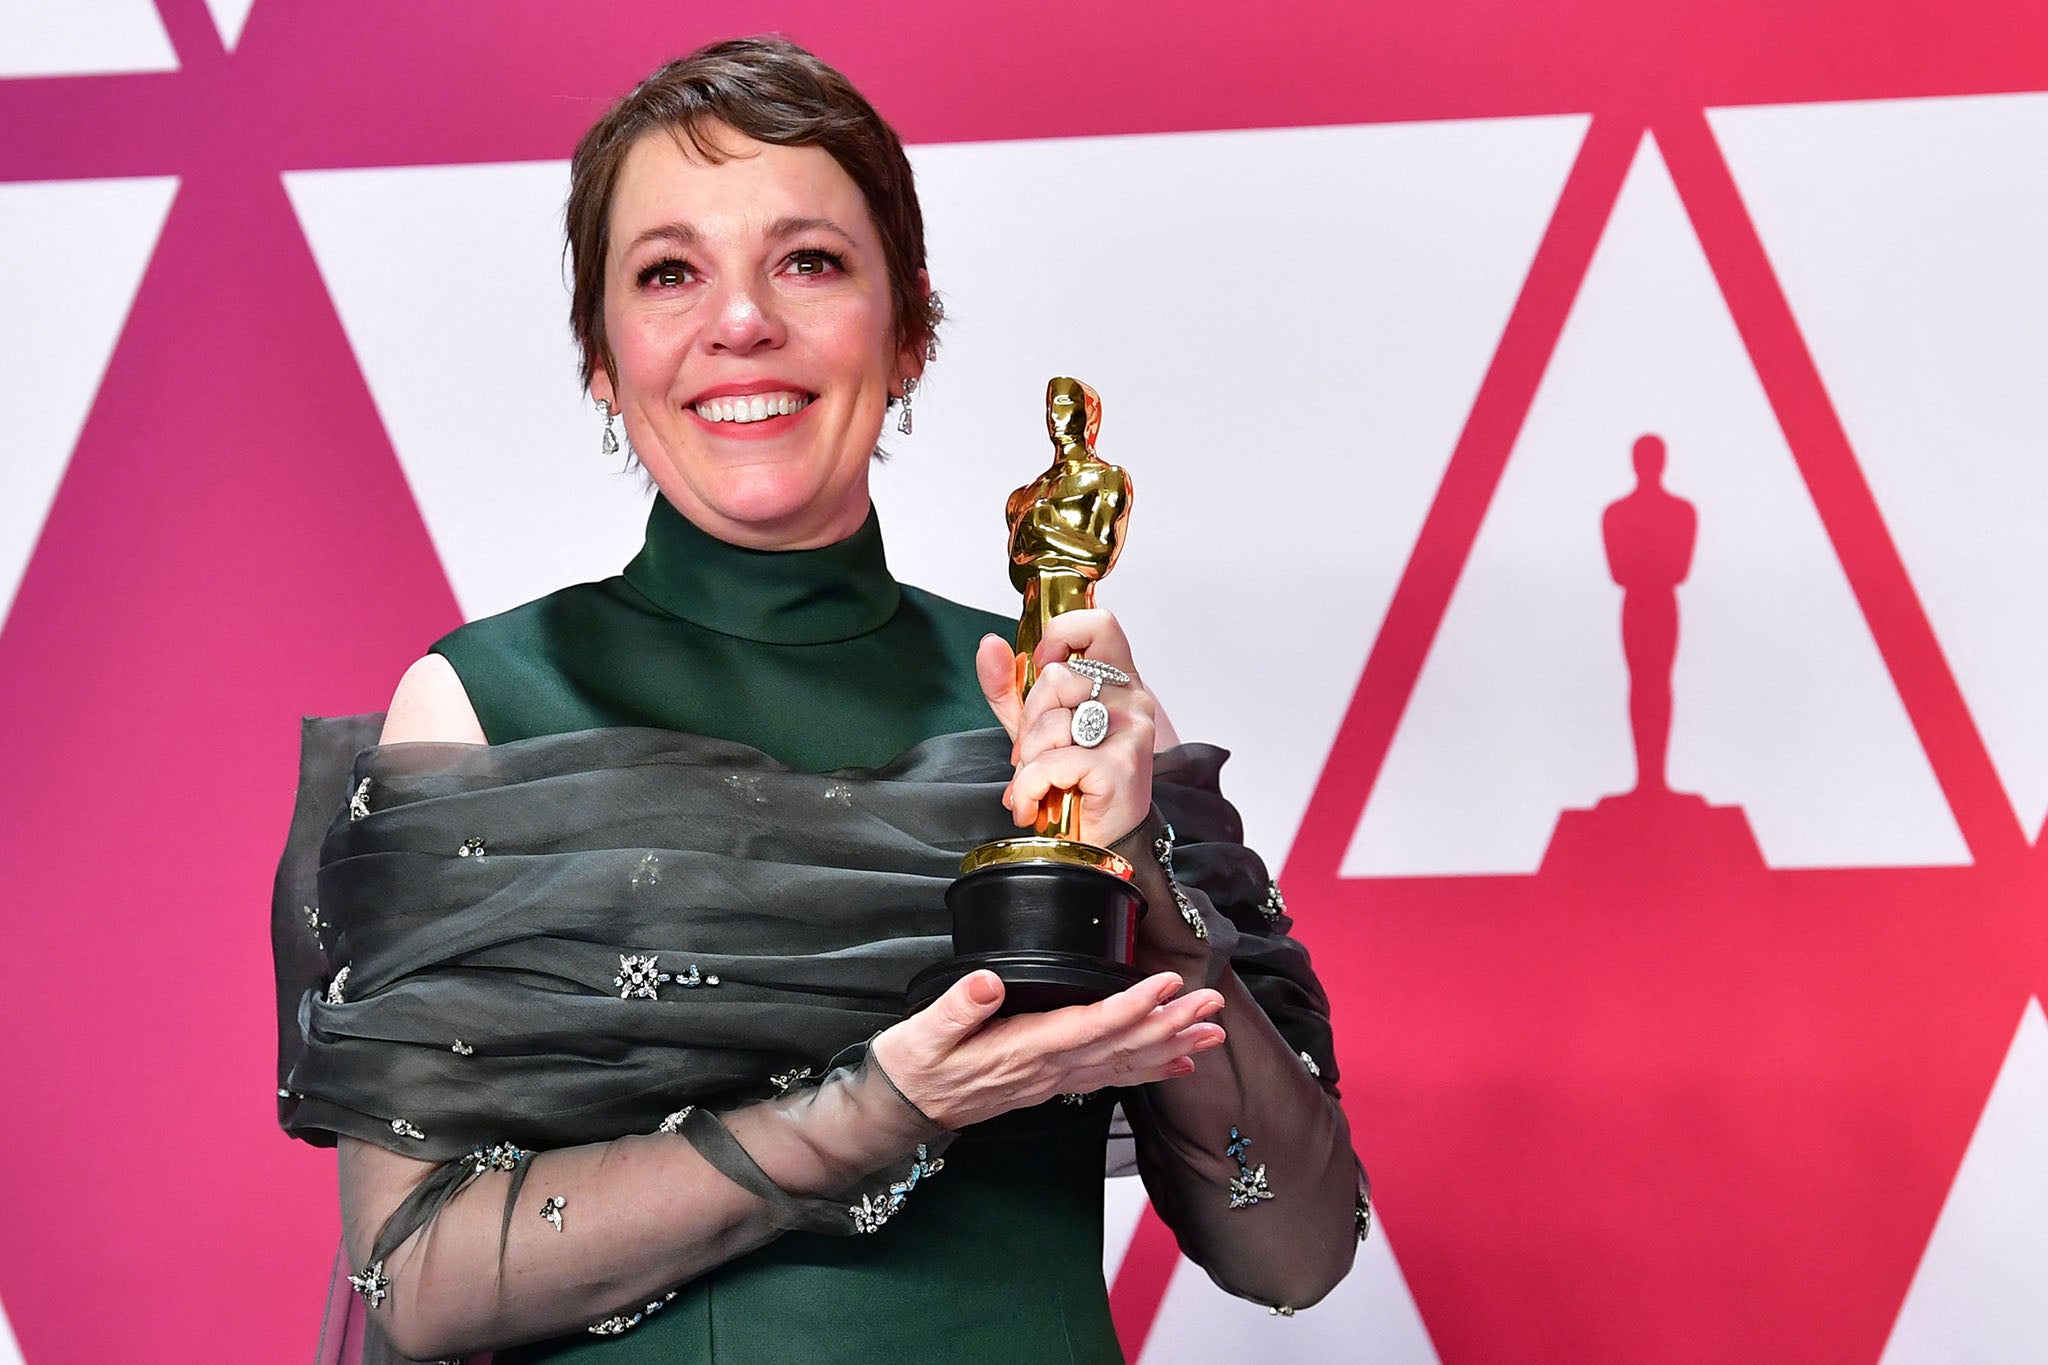 Oscar favourite: Colman with her Best Actress Academy Award in 2019